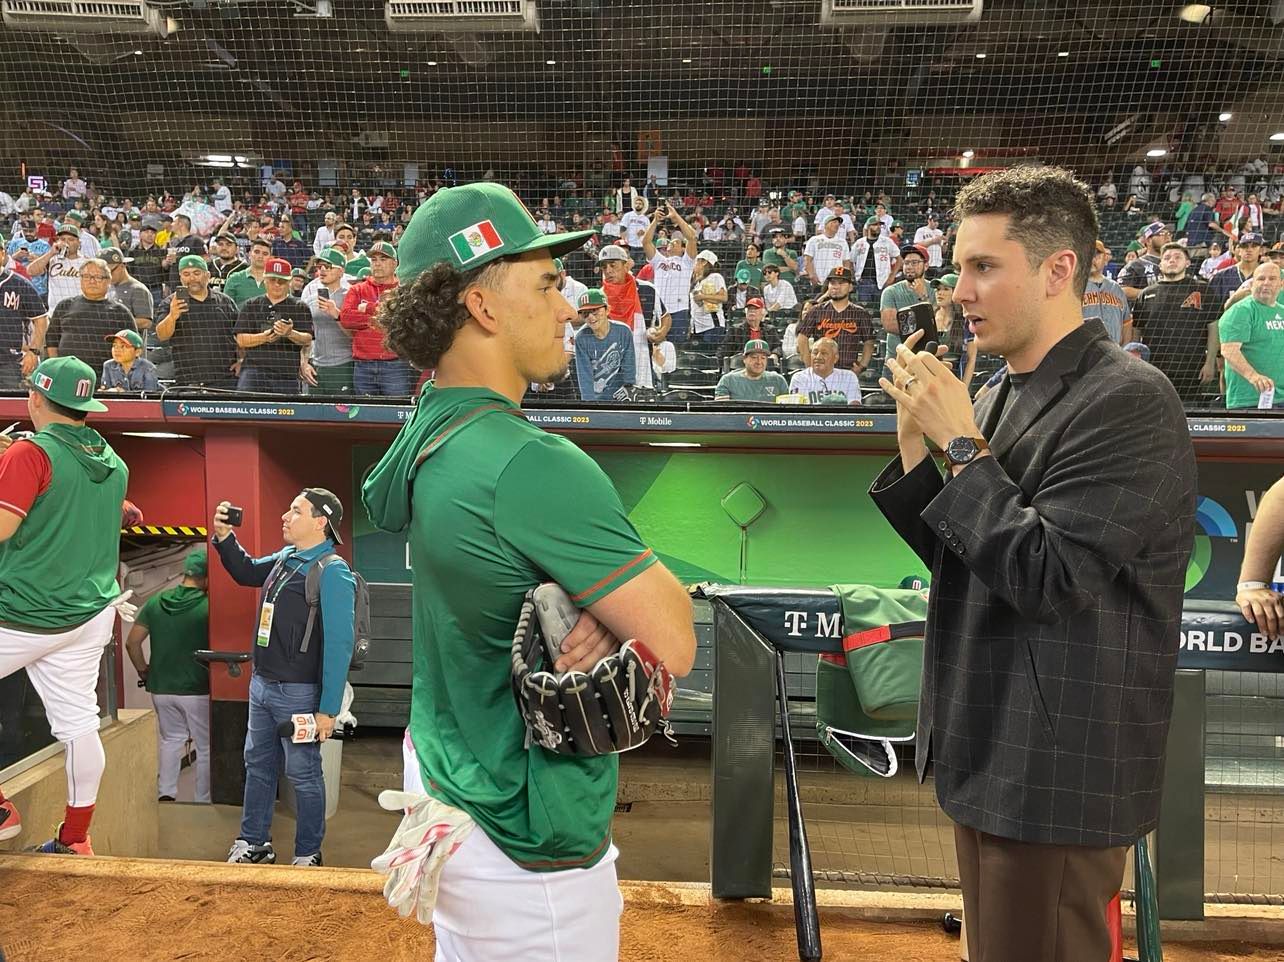 WBC Diary: Imagine if Tucson really tapped into Mexican baseball hysteria